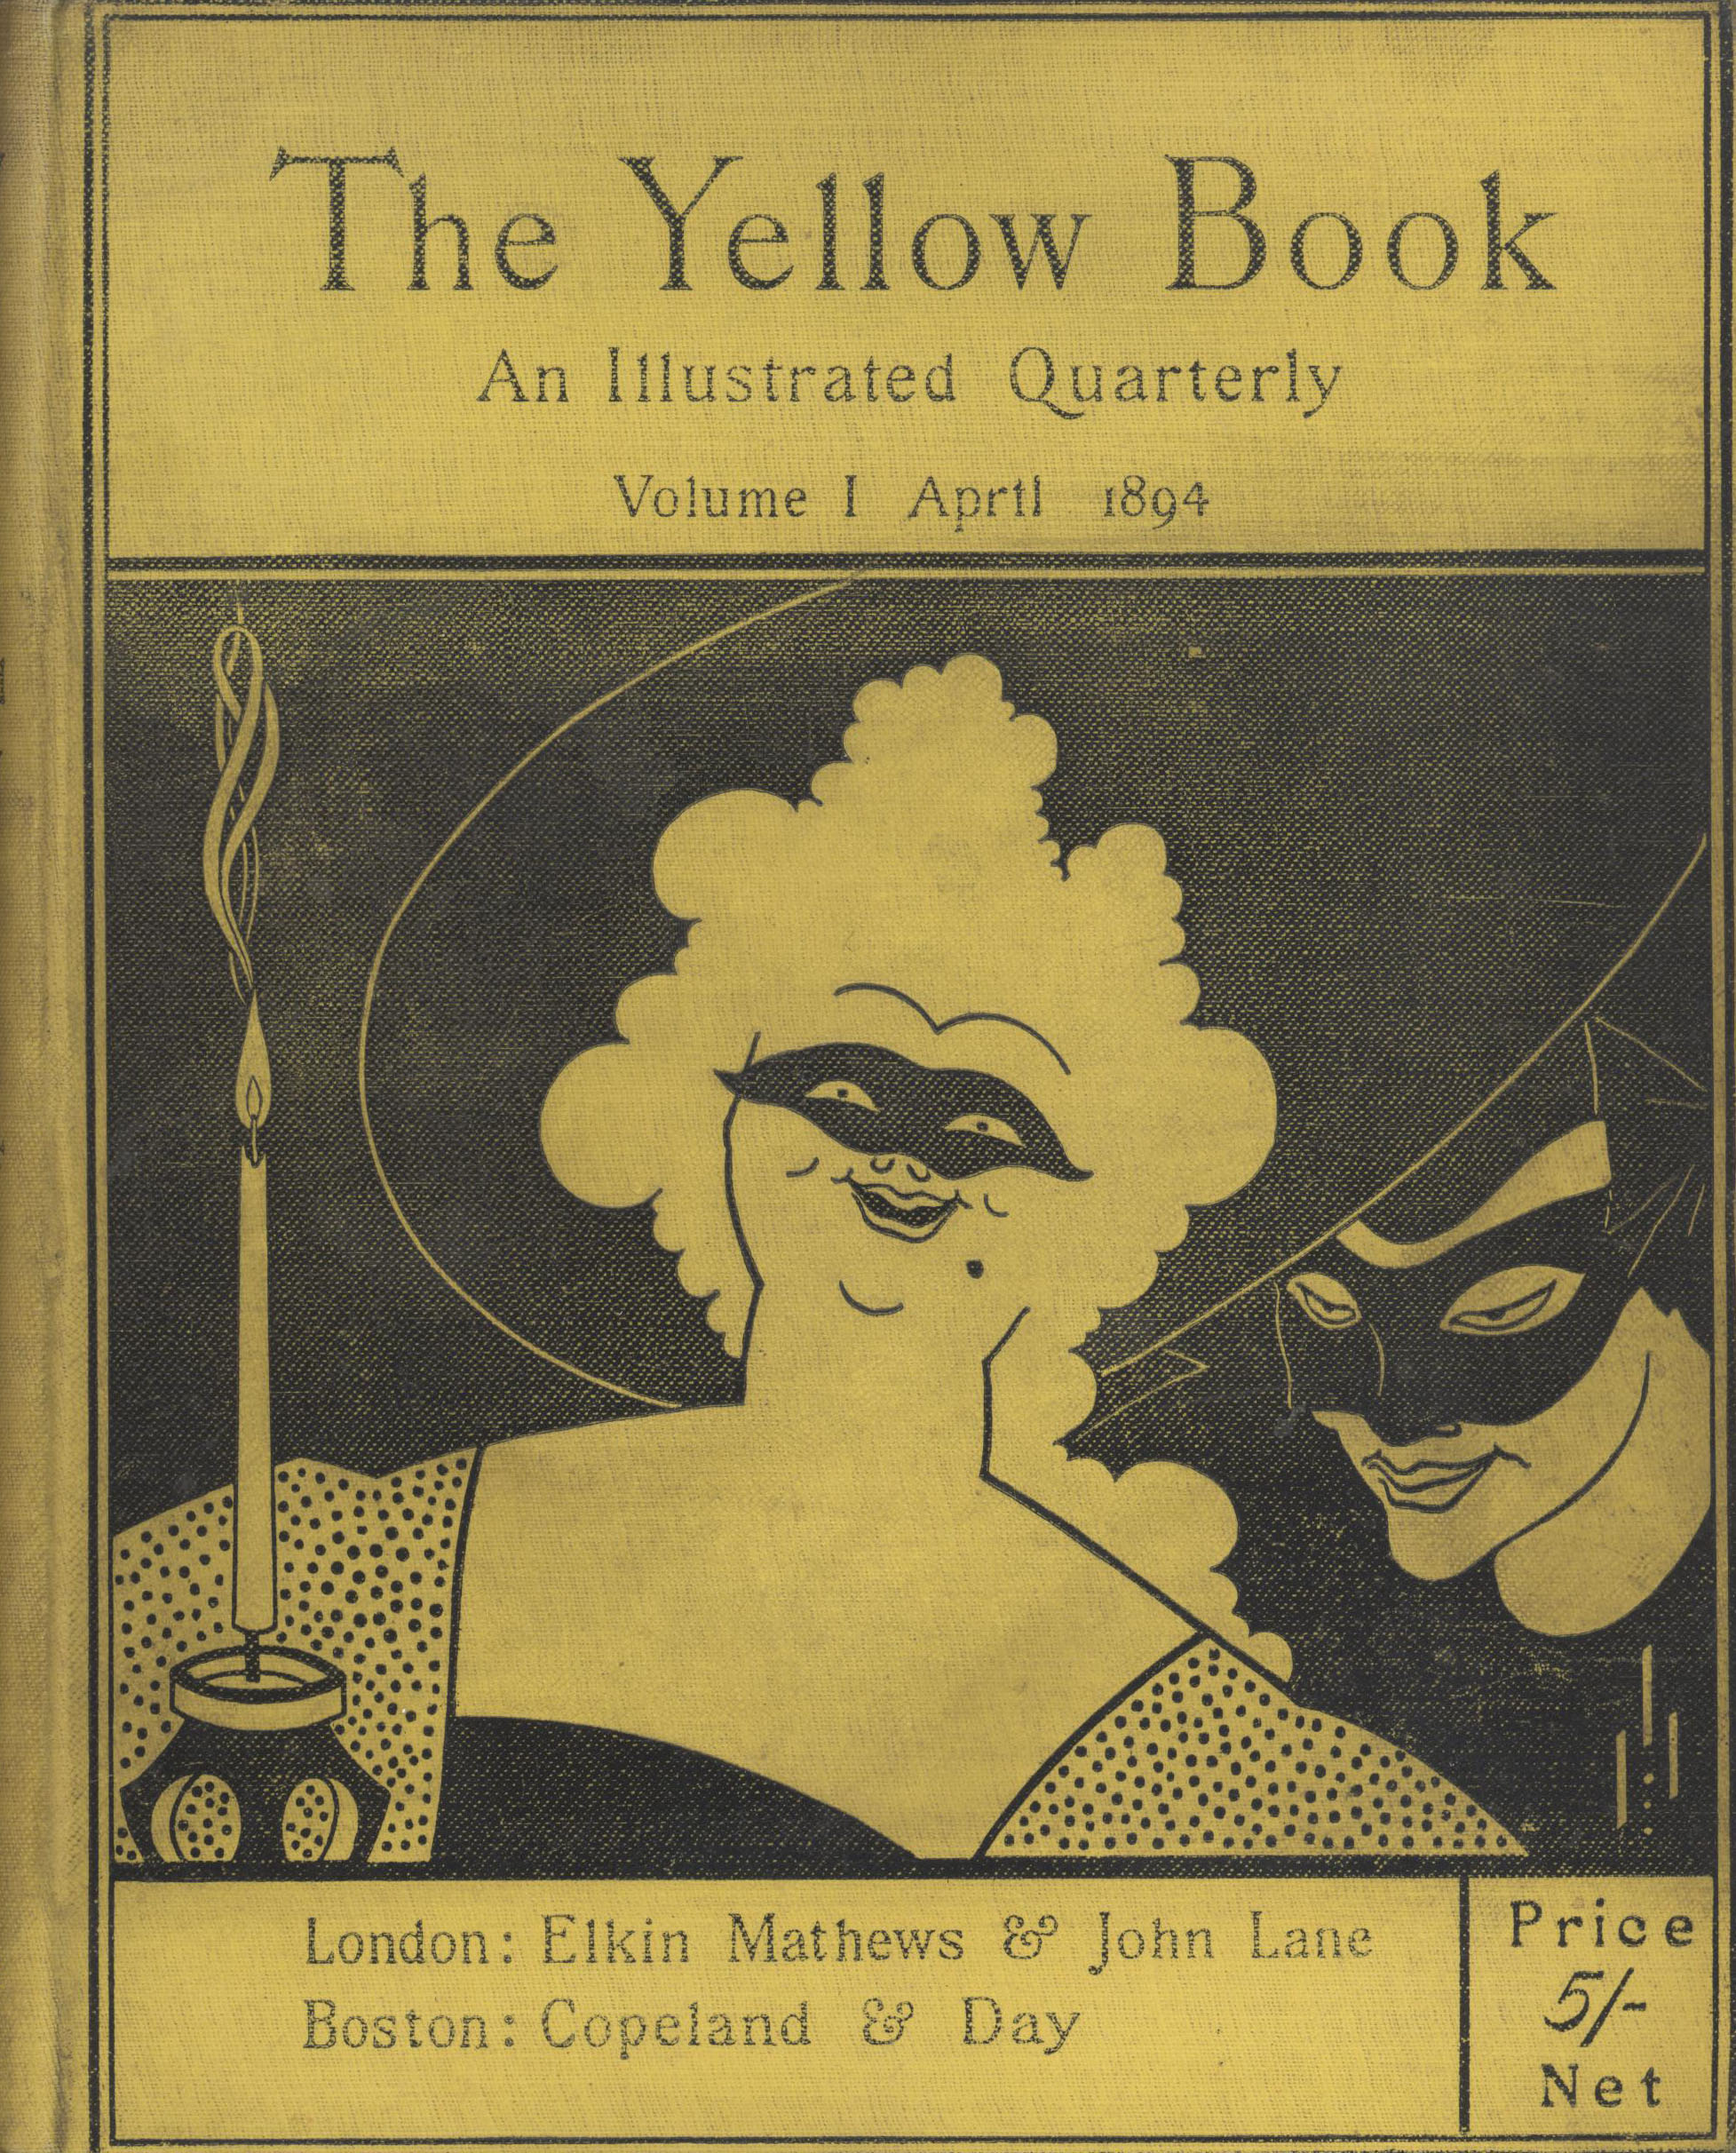 Cover of the Yellow Book with images of people dressed for carnival